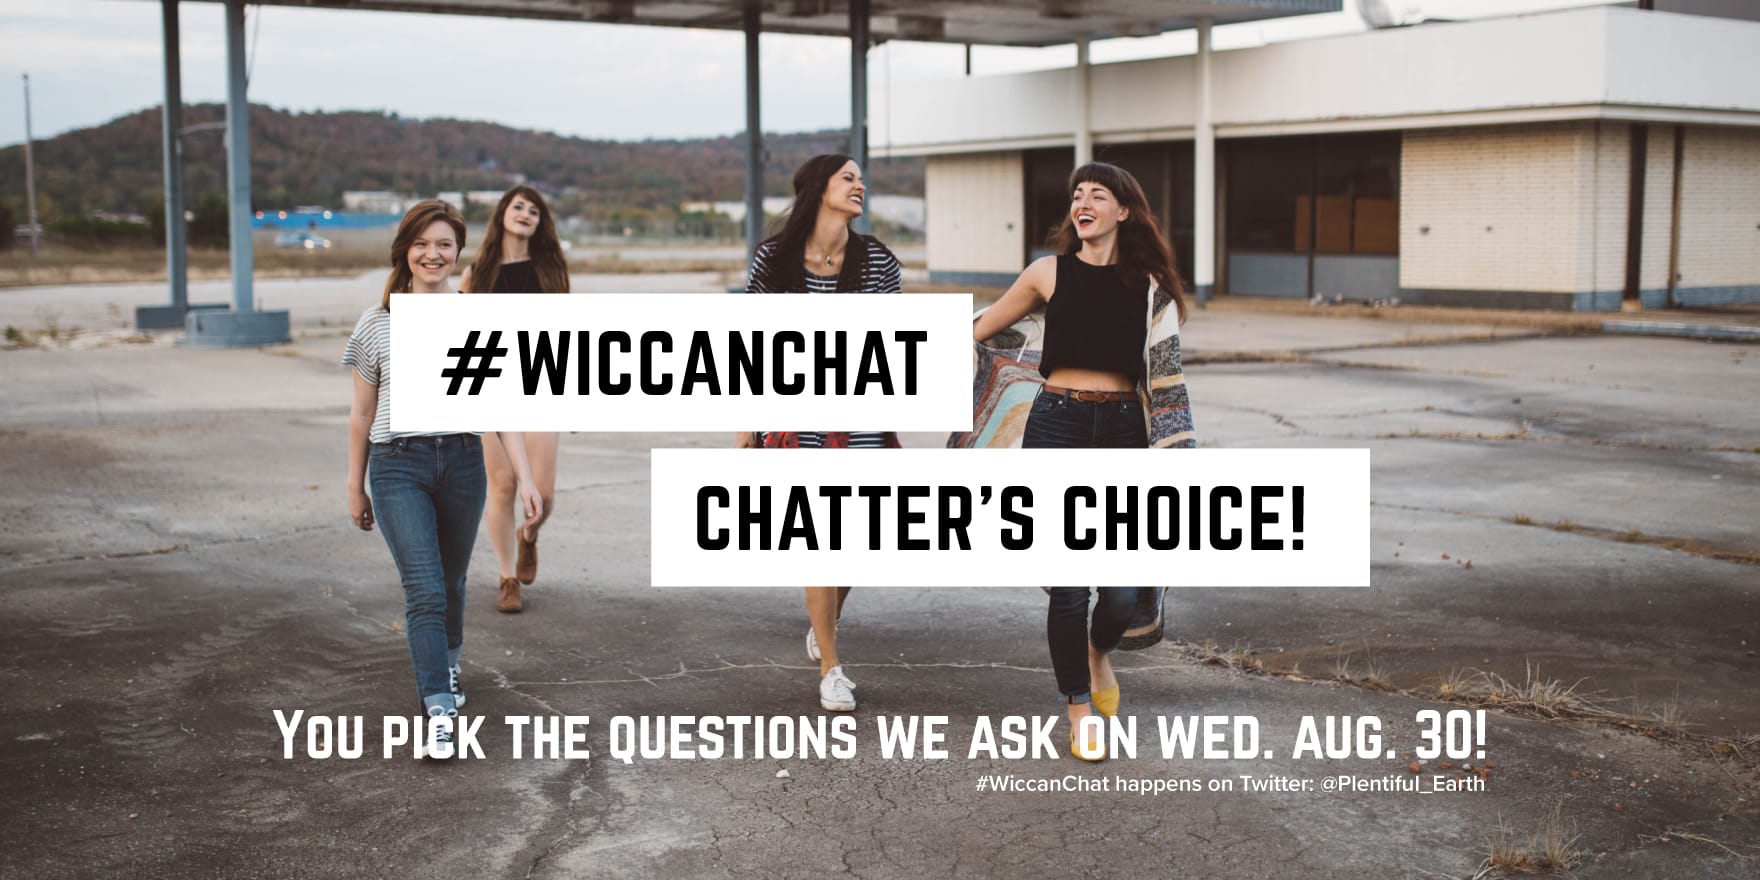 Friends joyfully walking together, engaging in an occult-themed discussion on social media under the hashtag #wiccachat.